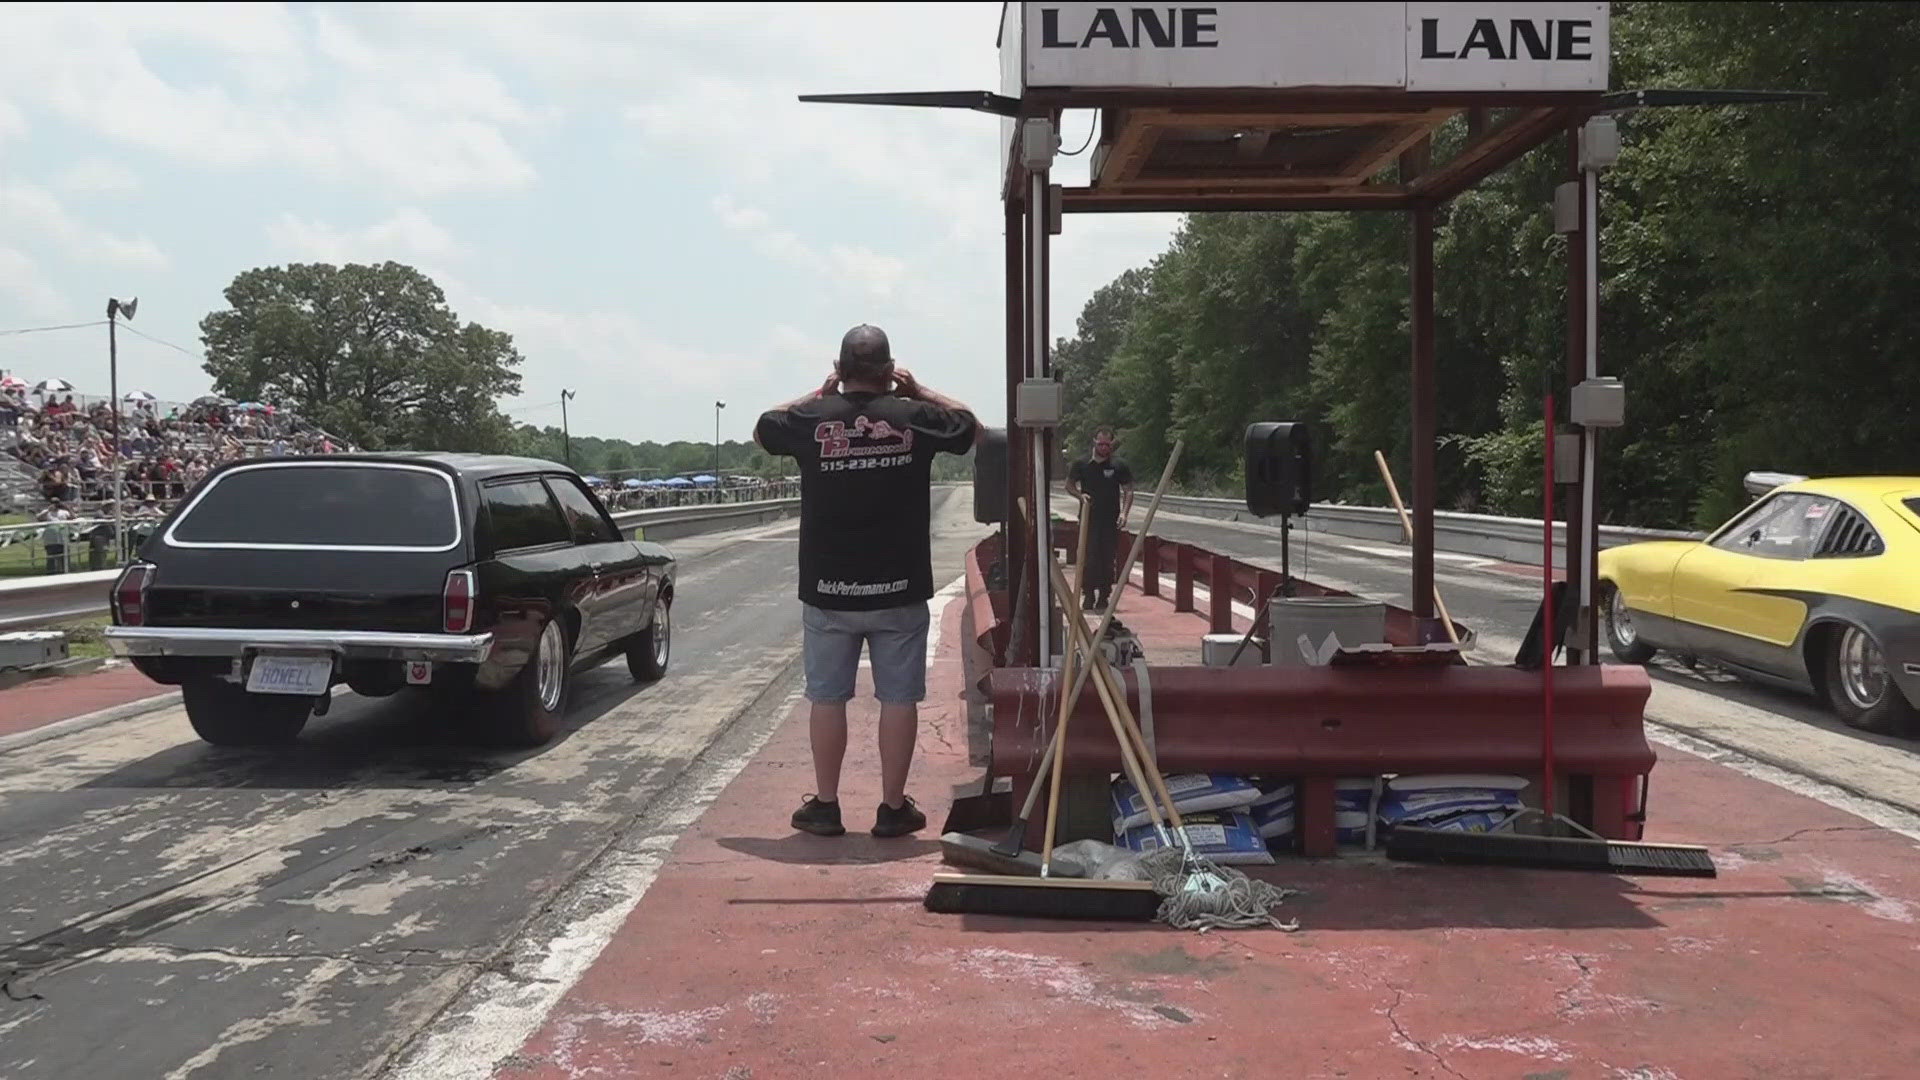 The grand reopening gives the local drag racing community a little piece of their heart back.